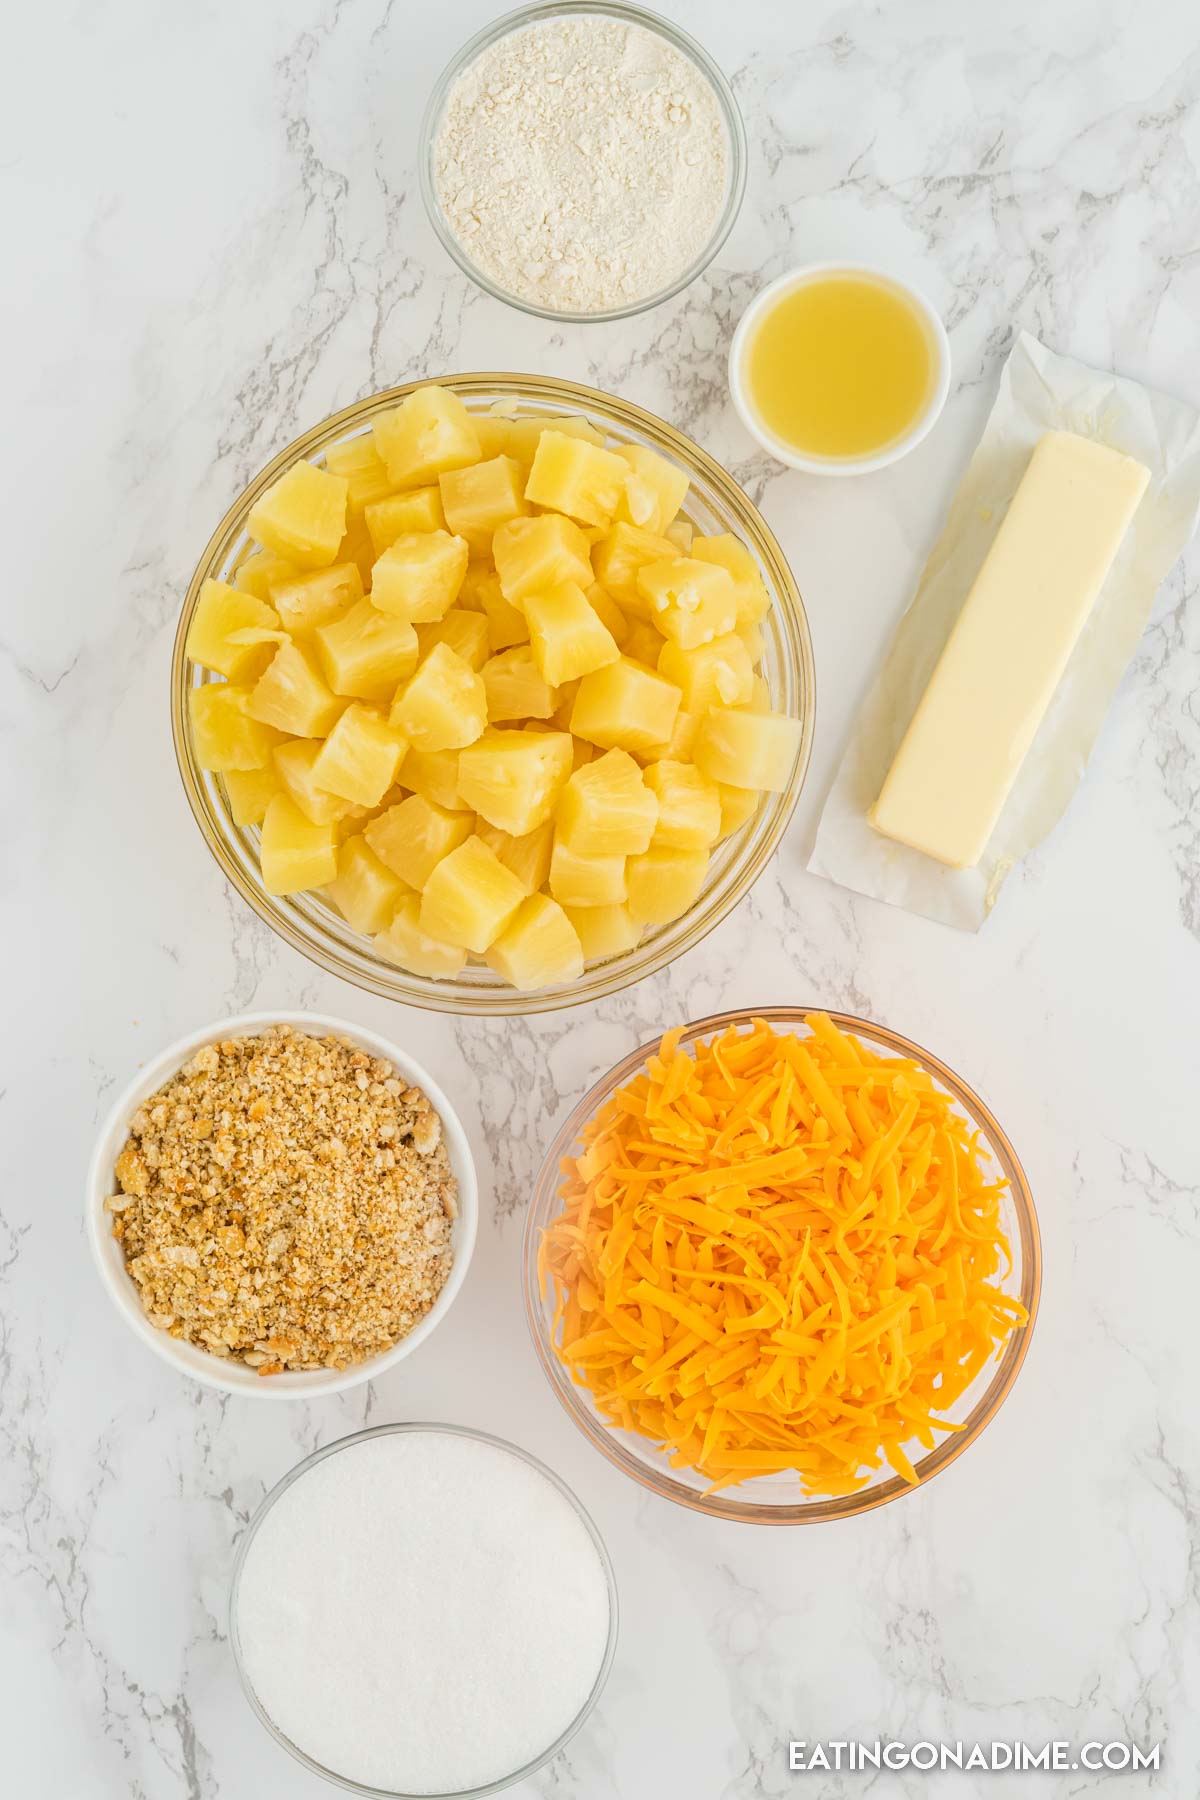 Ingredients needed - sugar, flour, cheese, pineapple chunks, crackers, butter